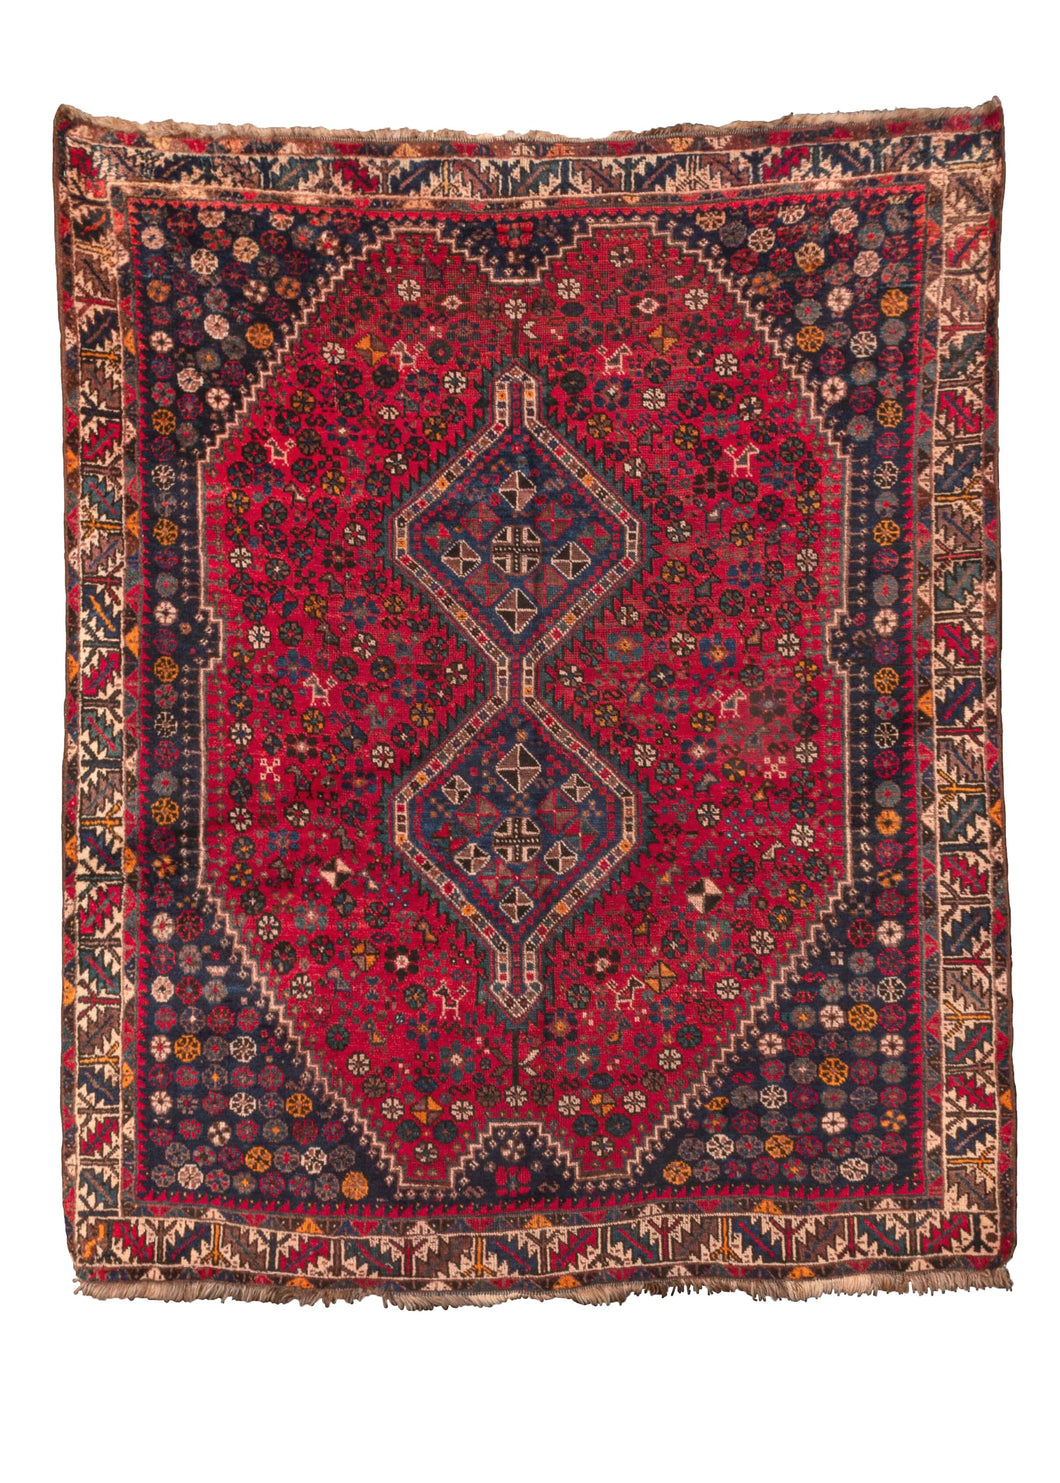 South Persian Shiraz Rug with bright colors and lush pile